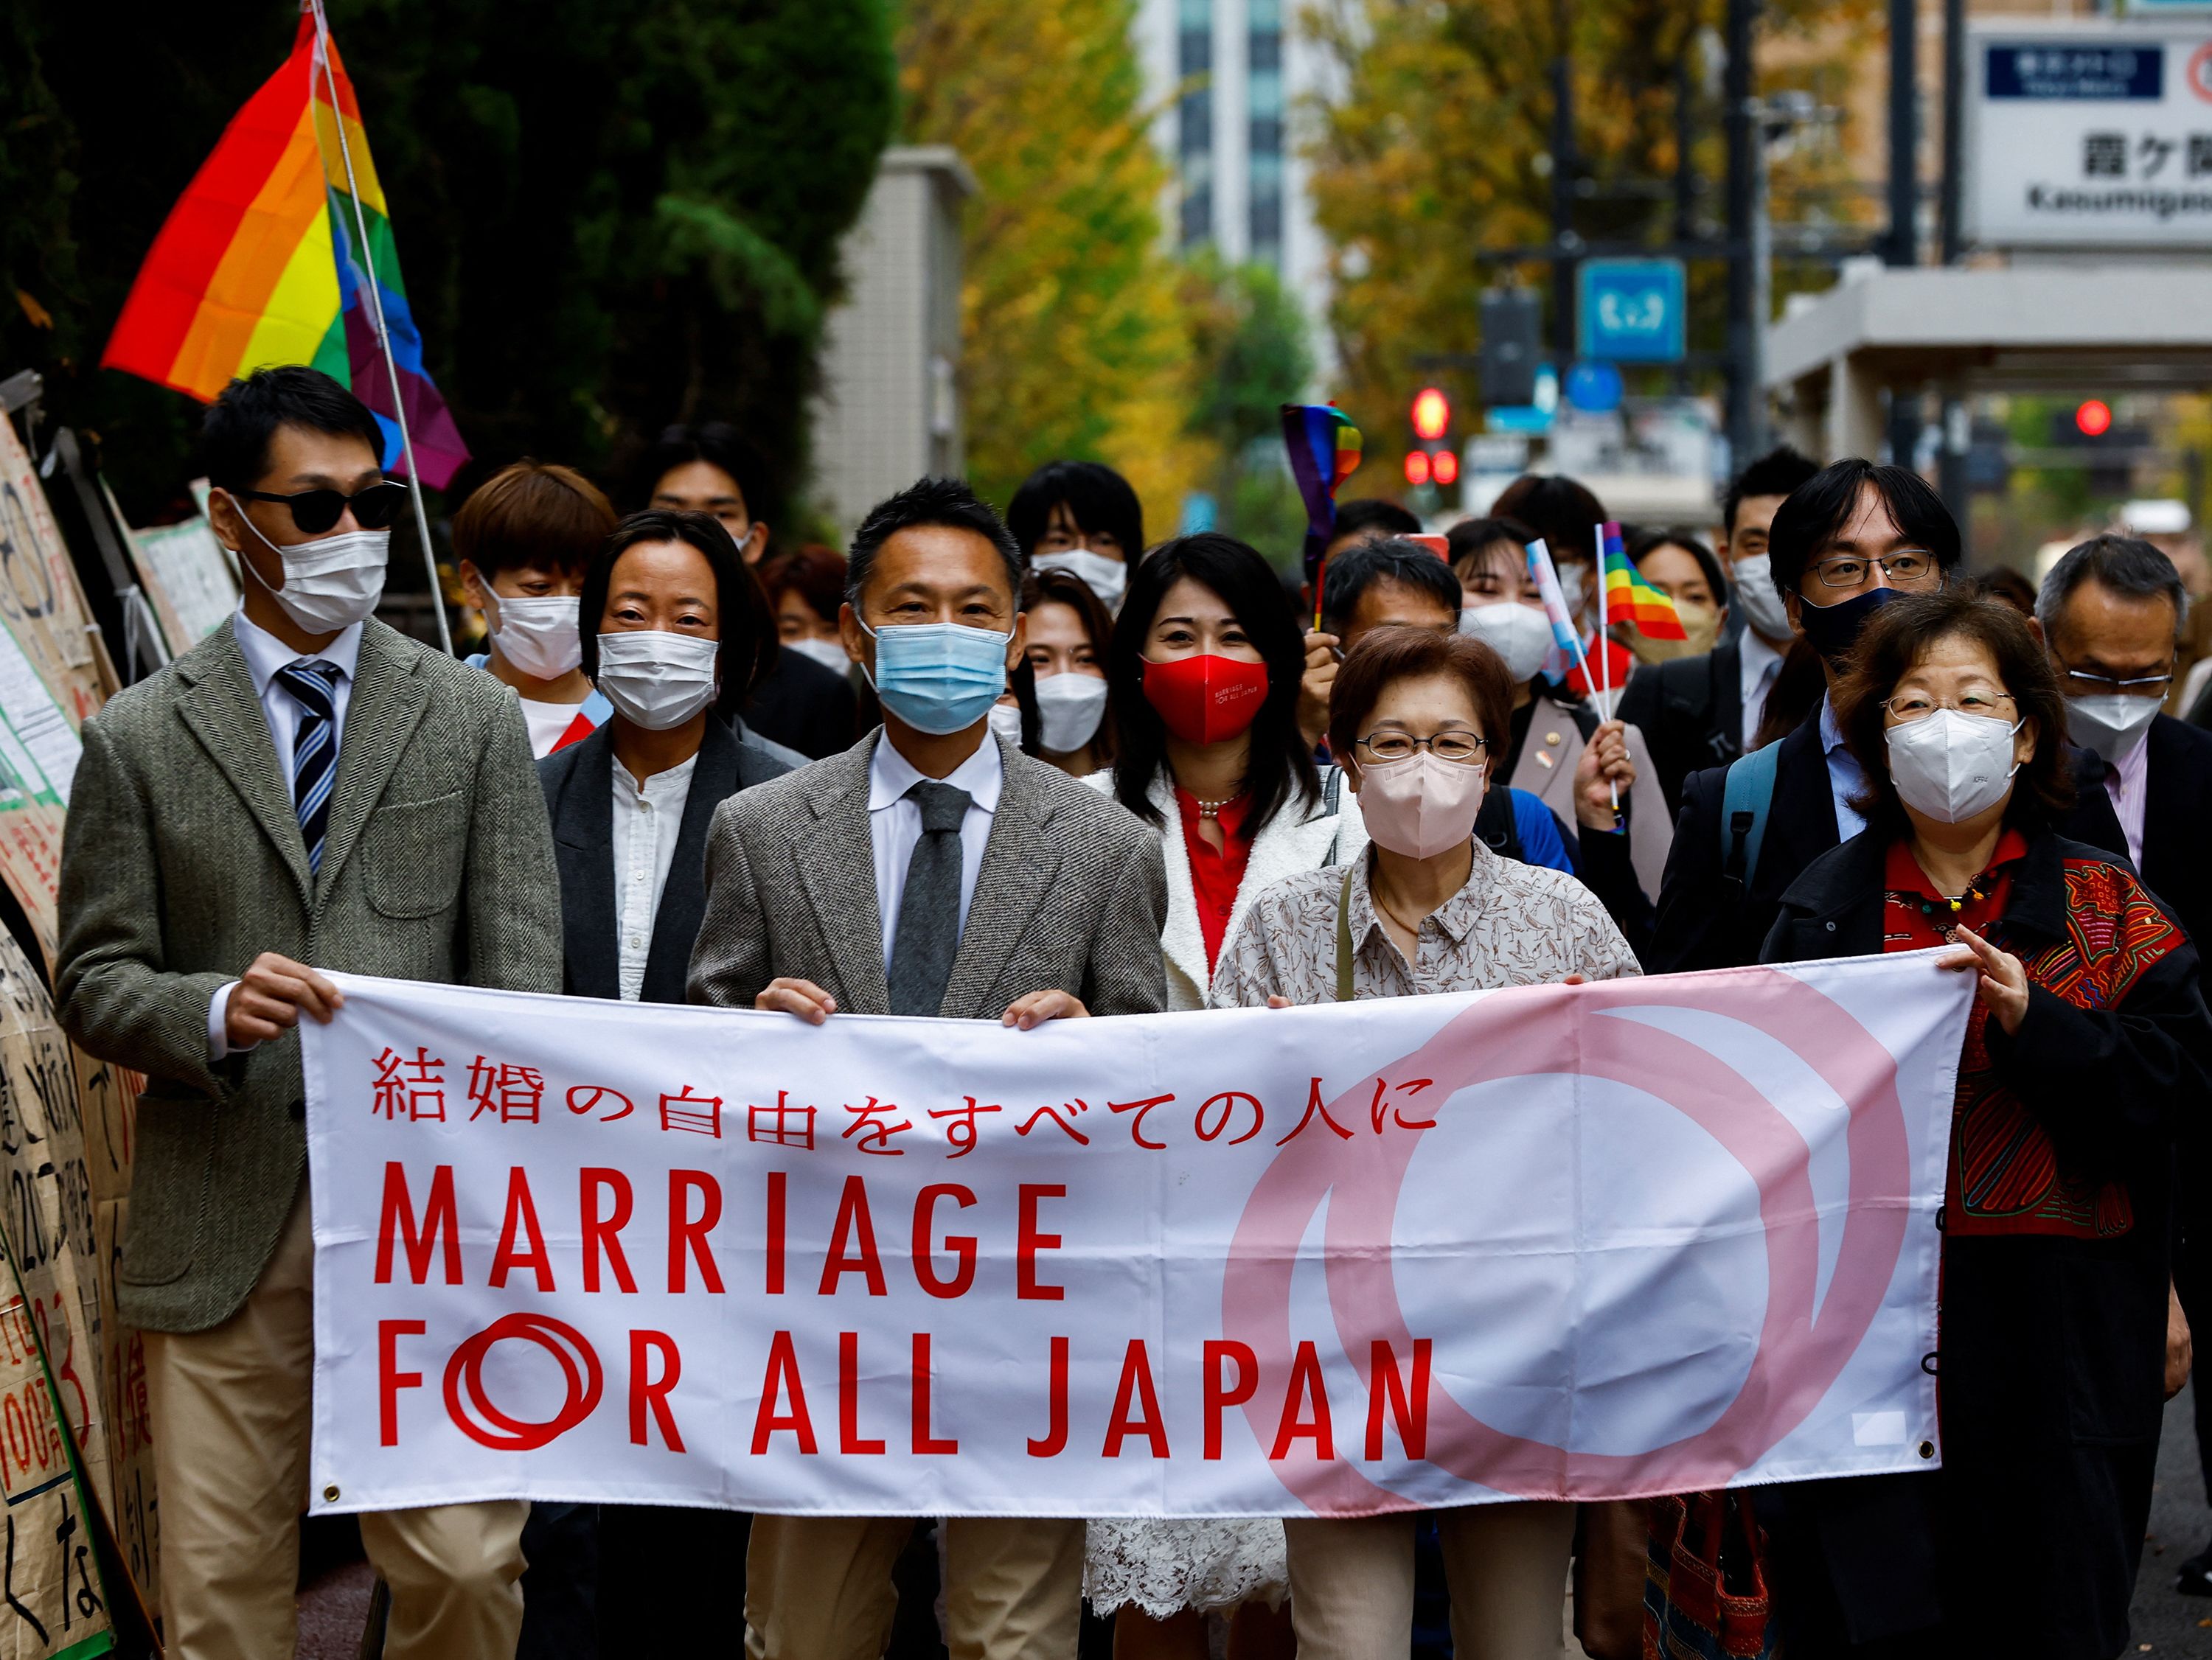 Japaensex - Japan court rules same-sex marriage ban is constitutional, but activists  see a silver lining | CNN